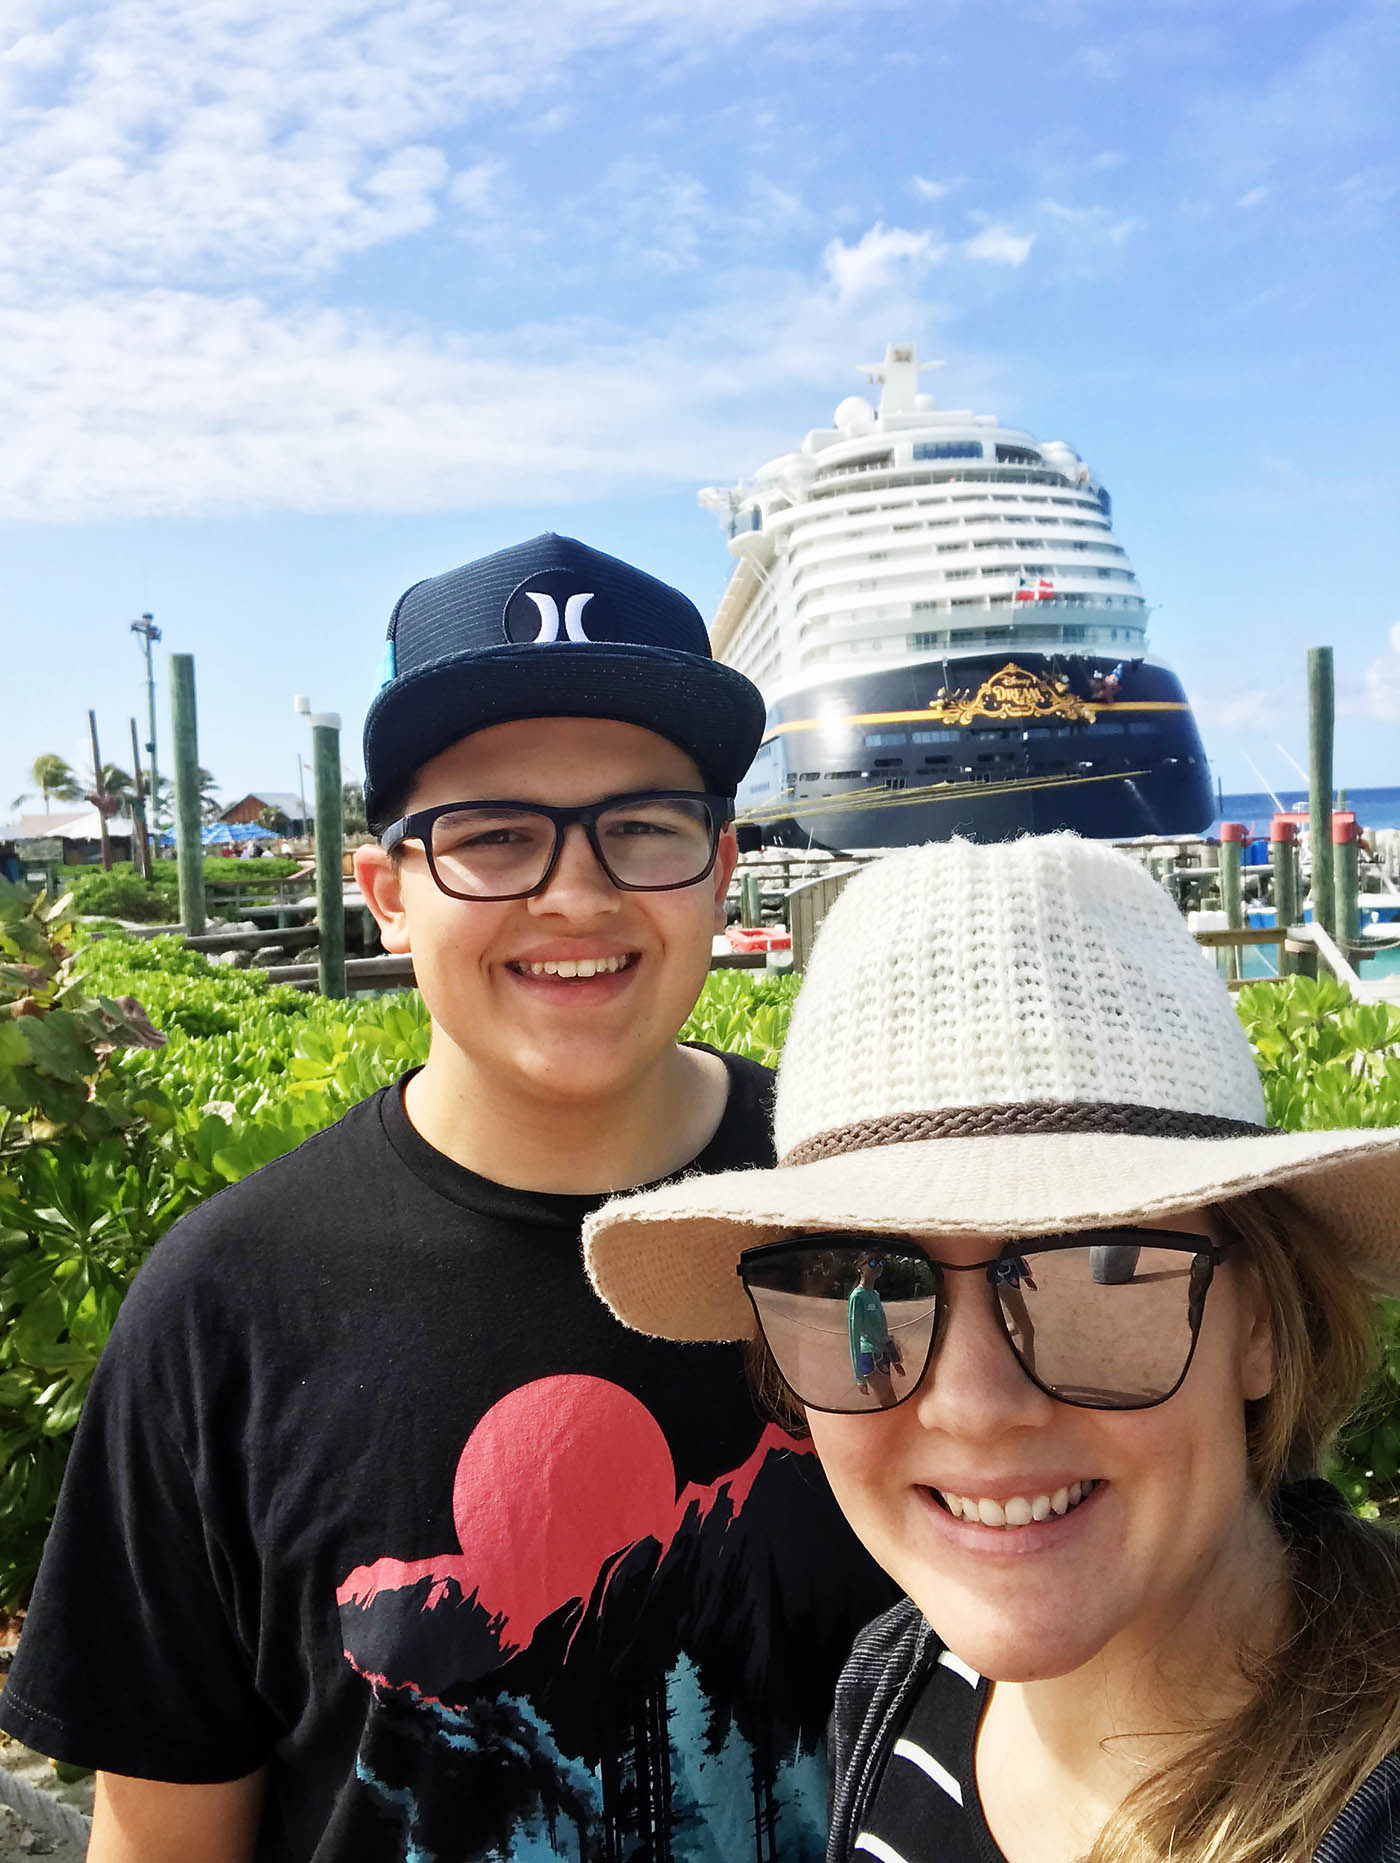 Why parents of teens will LOVE the Disney Cruise Line